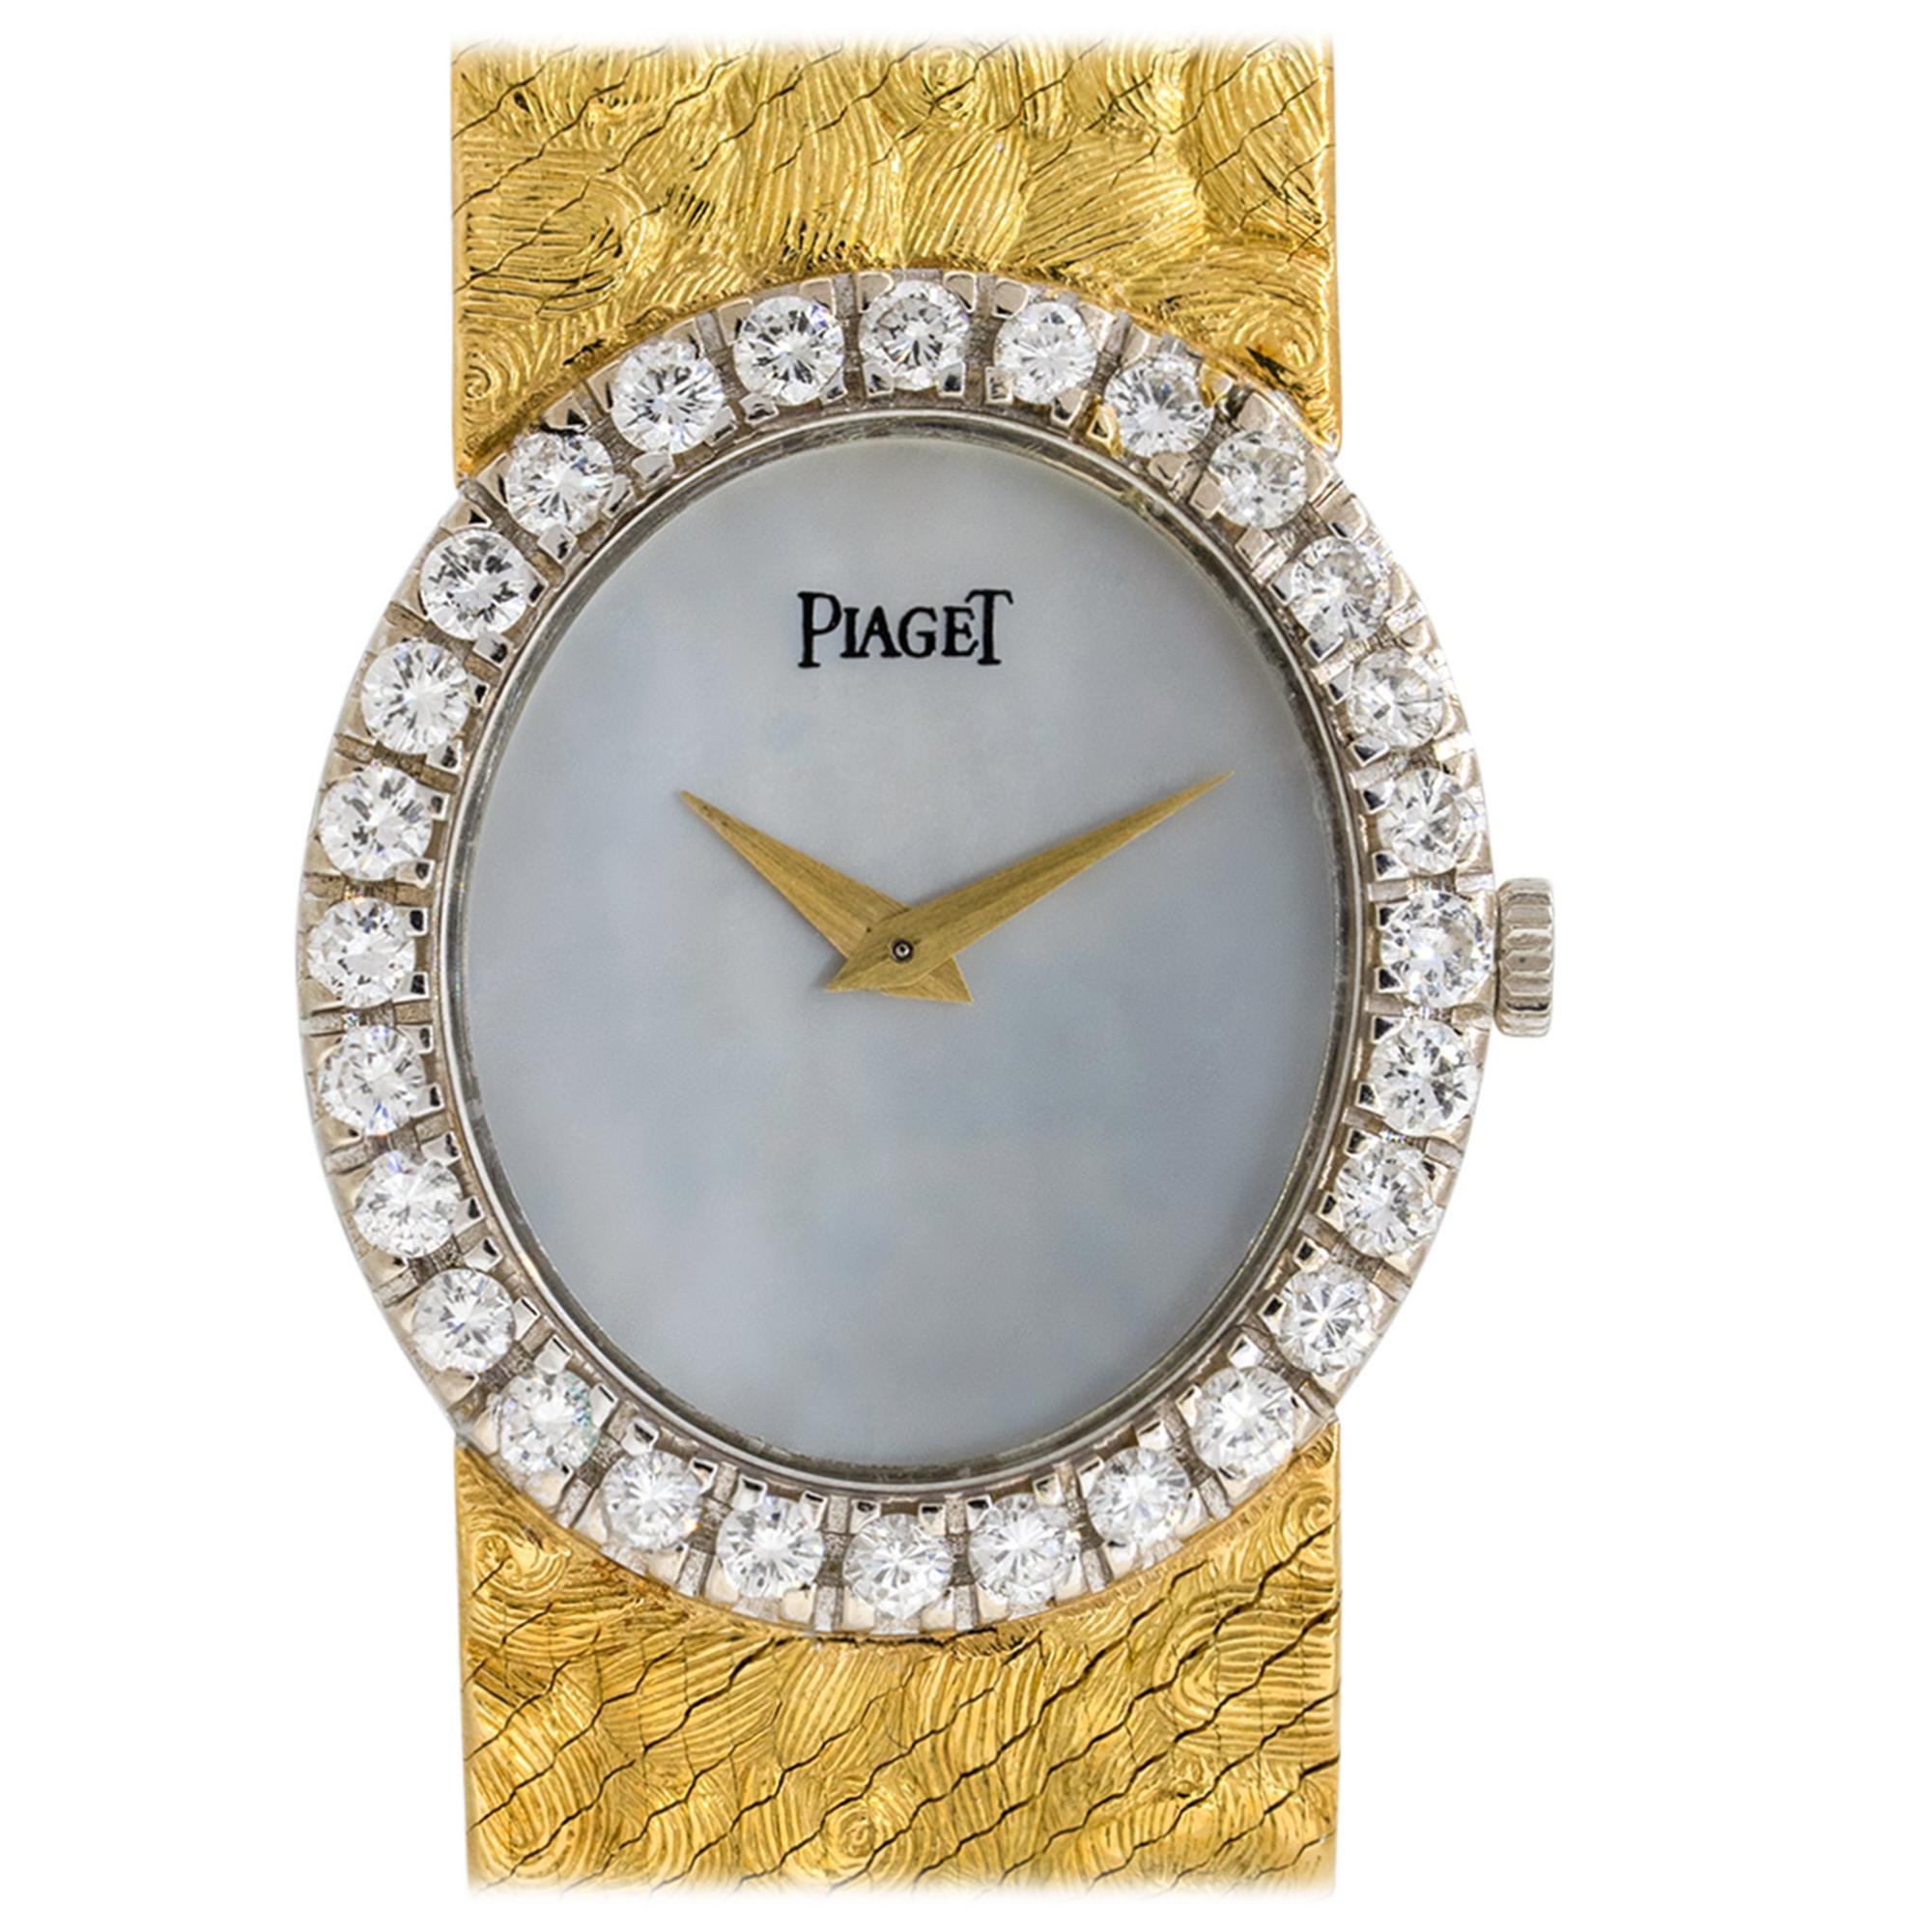 Piaget 9814 Mother of Pearl Dial Diamond Watch 18 Karat in Stock For Sale